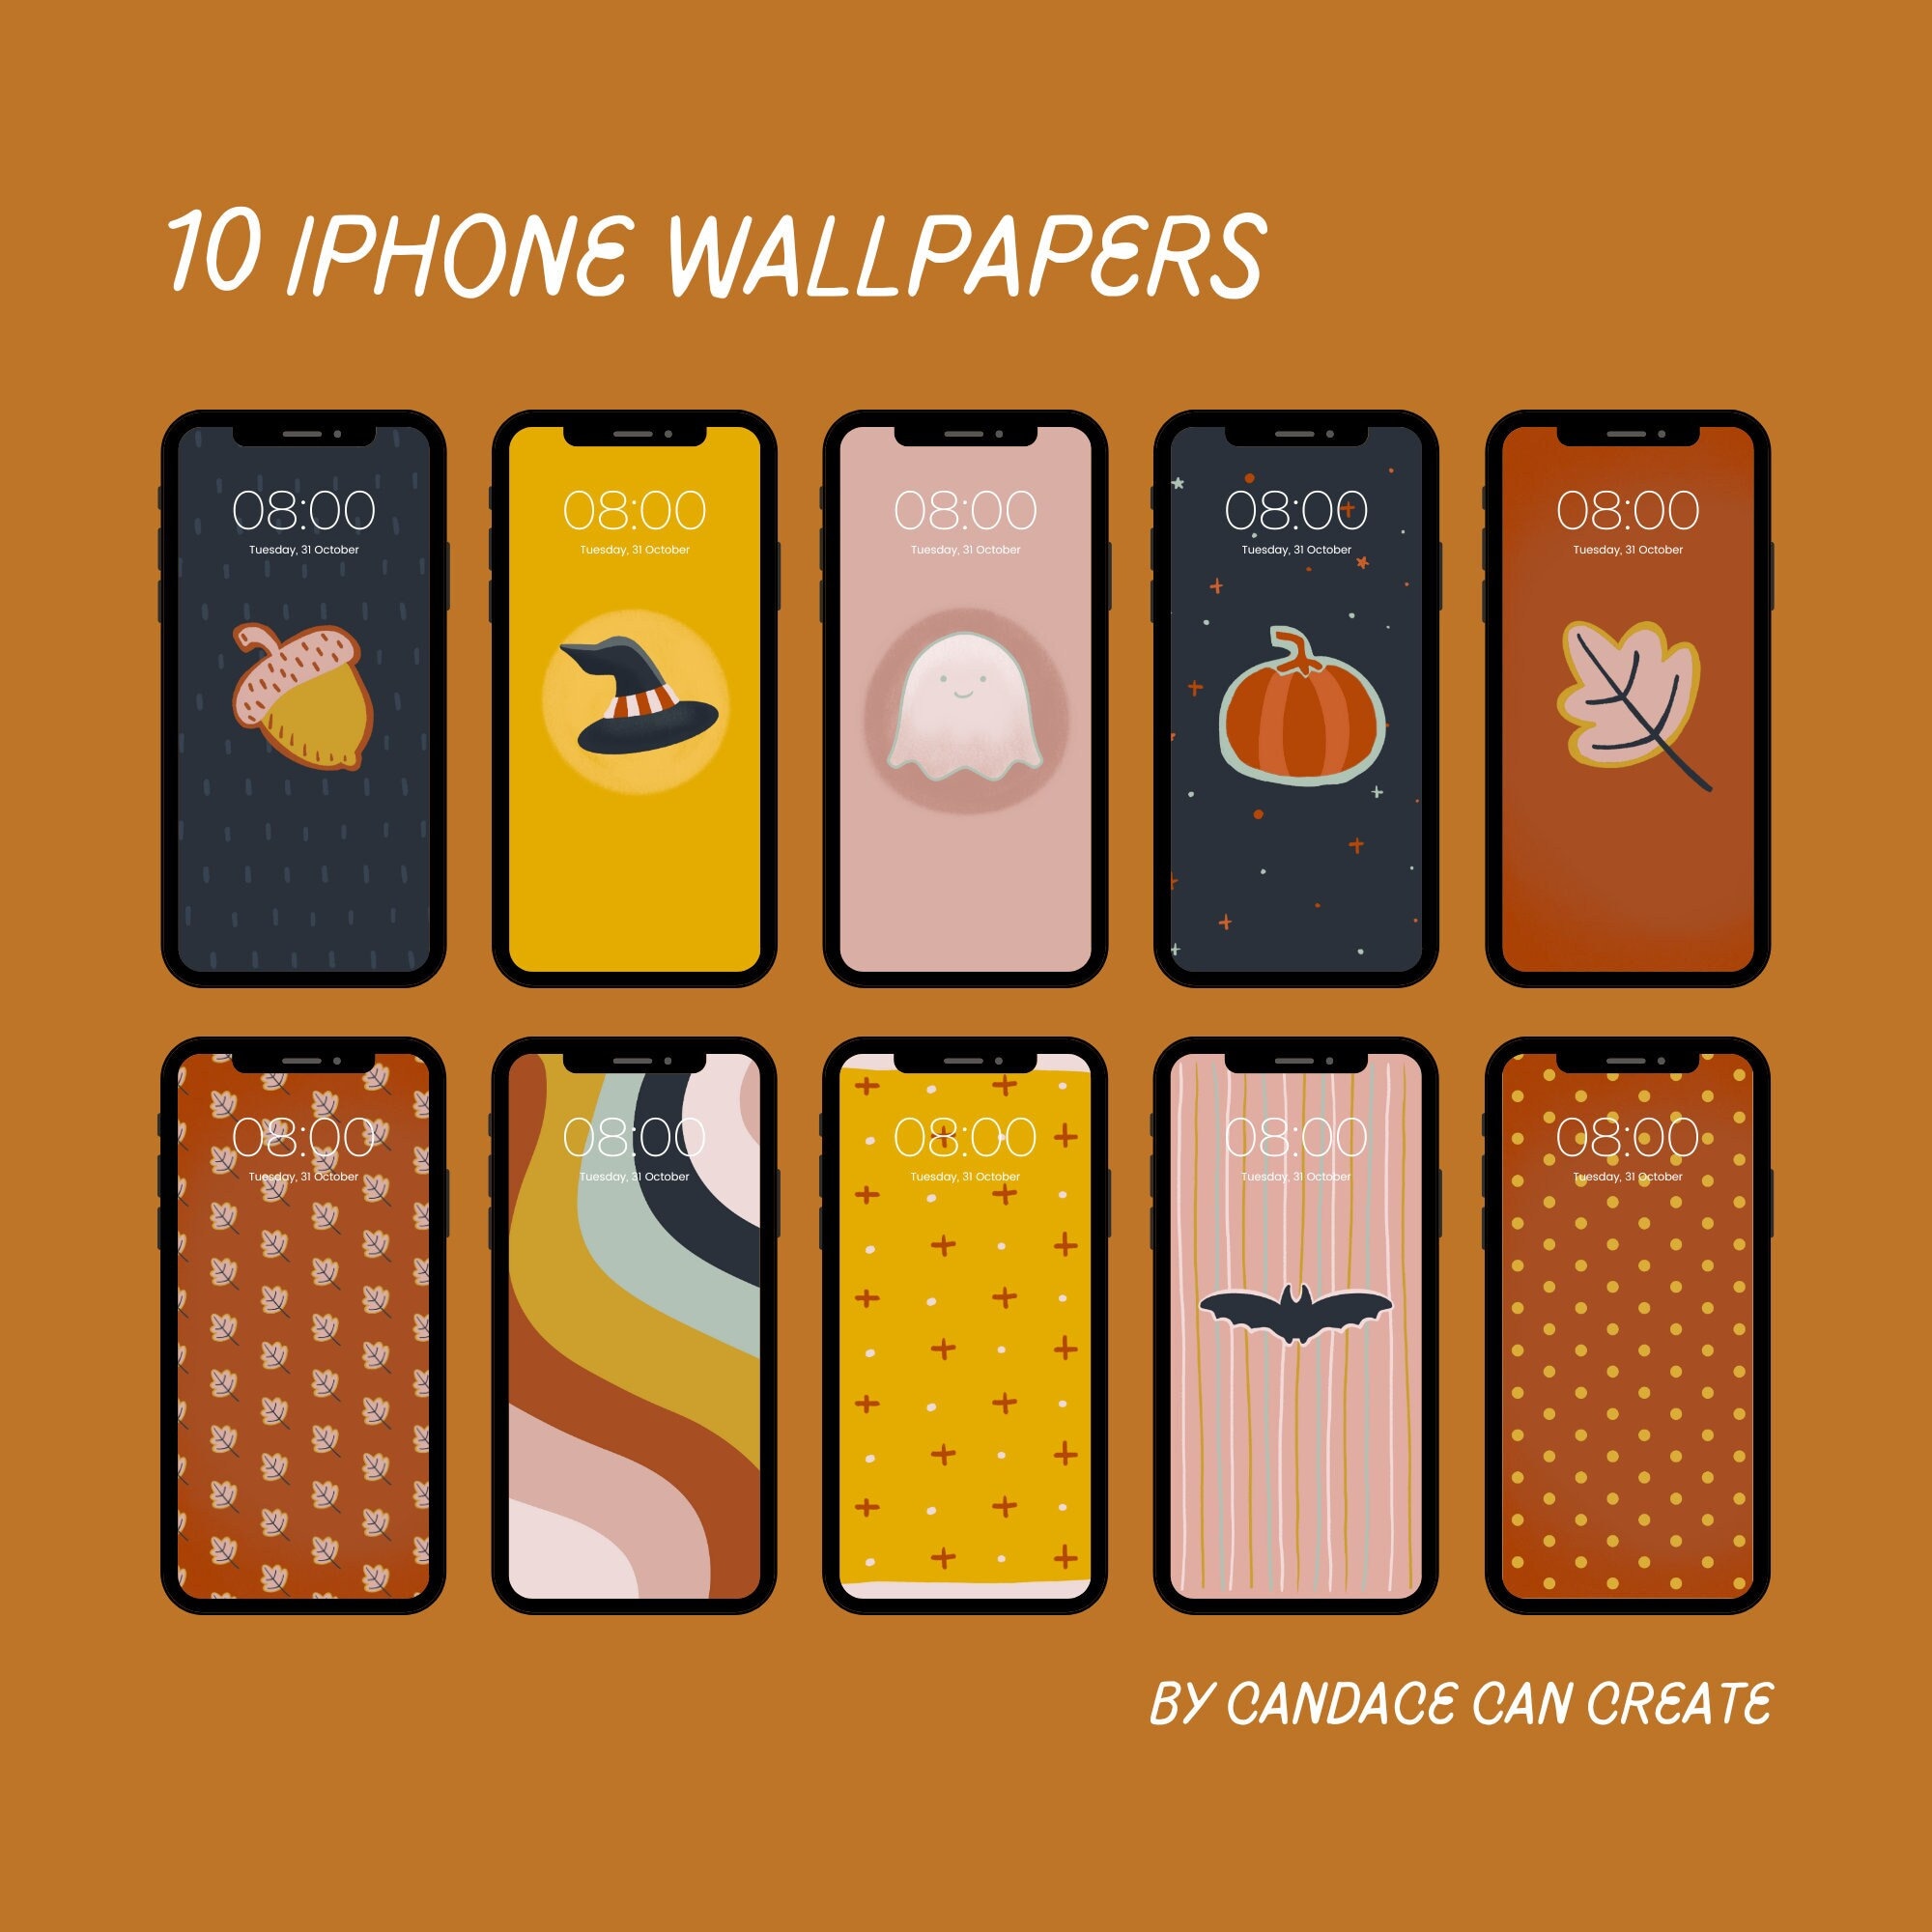 Download Accessorize in style with Louis Vuitton's iPhone Wallpaper